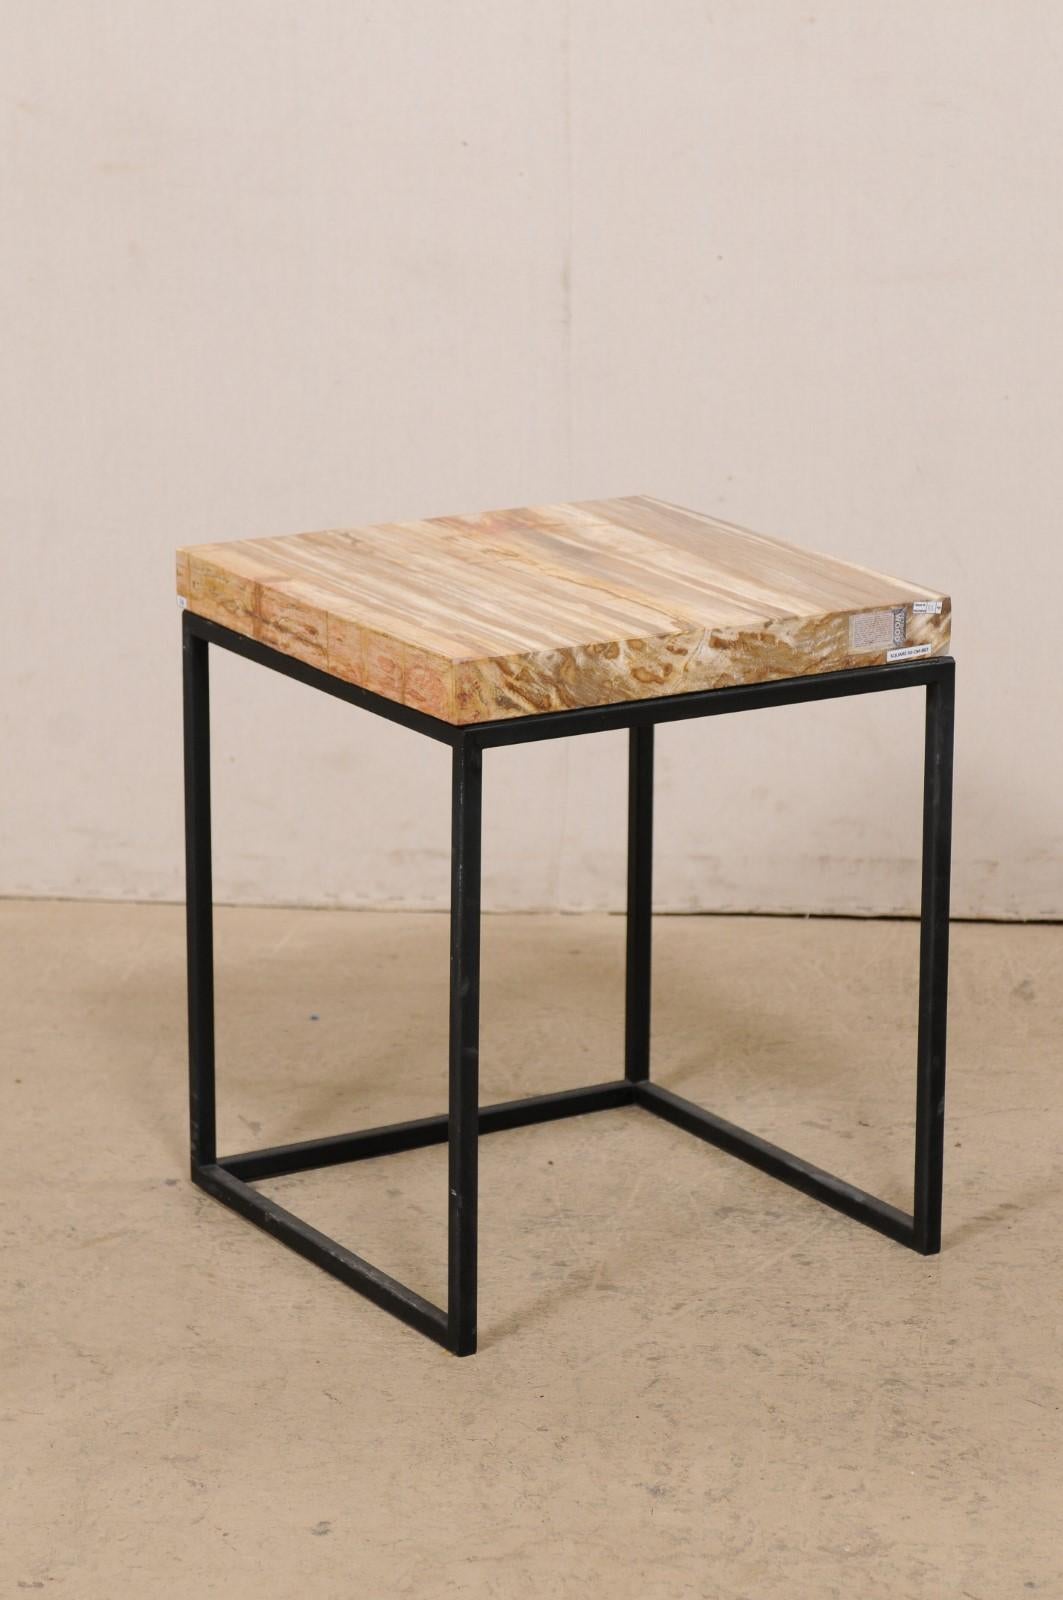 A pair of modern style custom petrified wood top side tables. This pair of tables each feature a square-shaped petrified wood top, in beautiful warm brown and beige tones. The tops are supported by a custom metal base, which is black in color, with